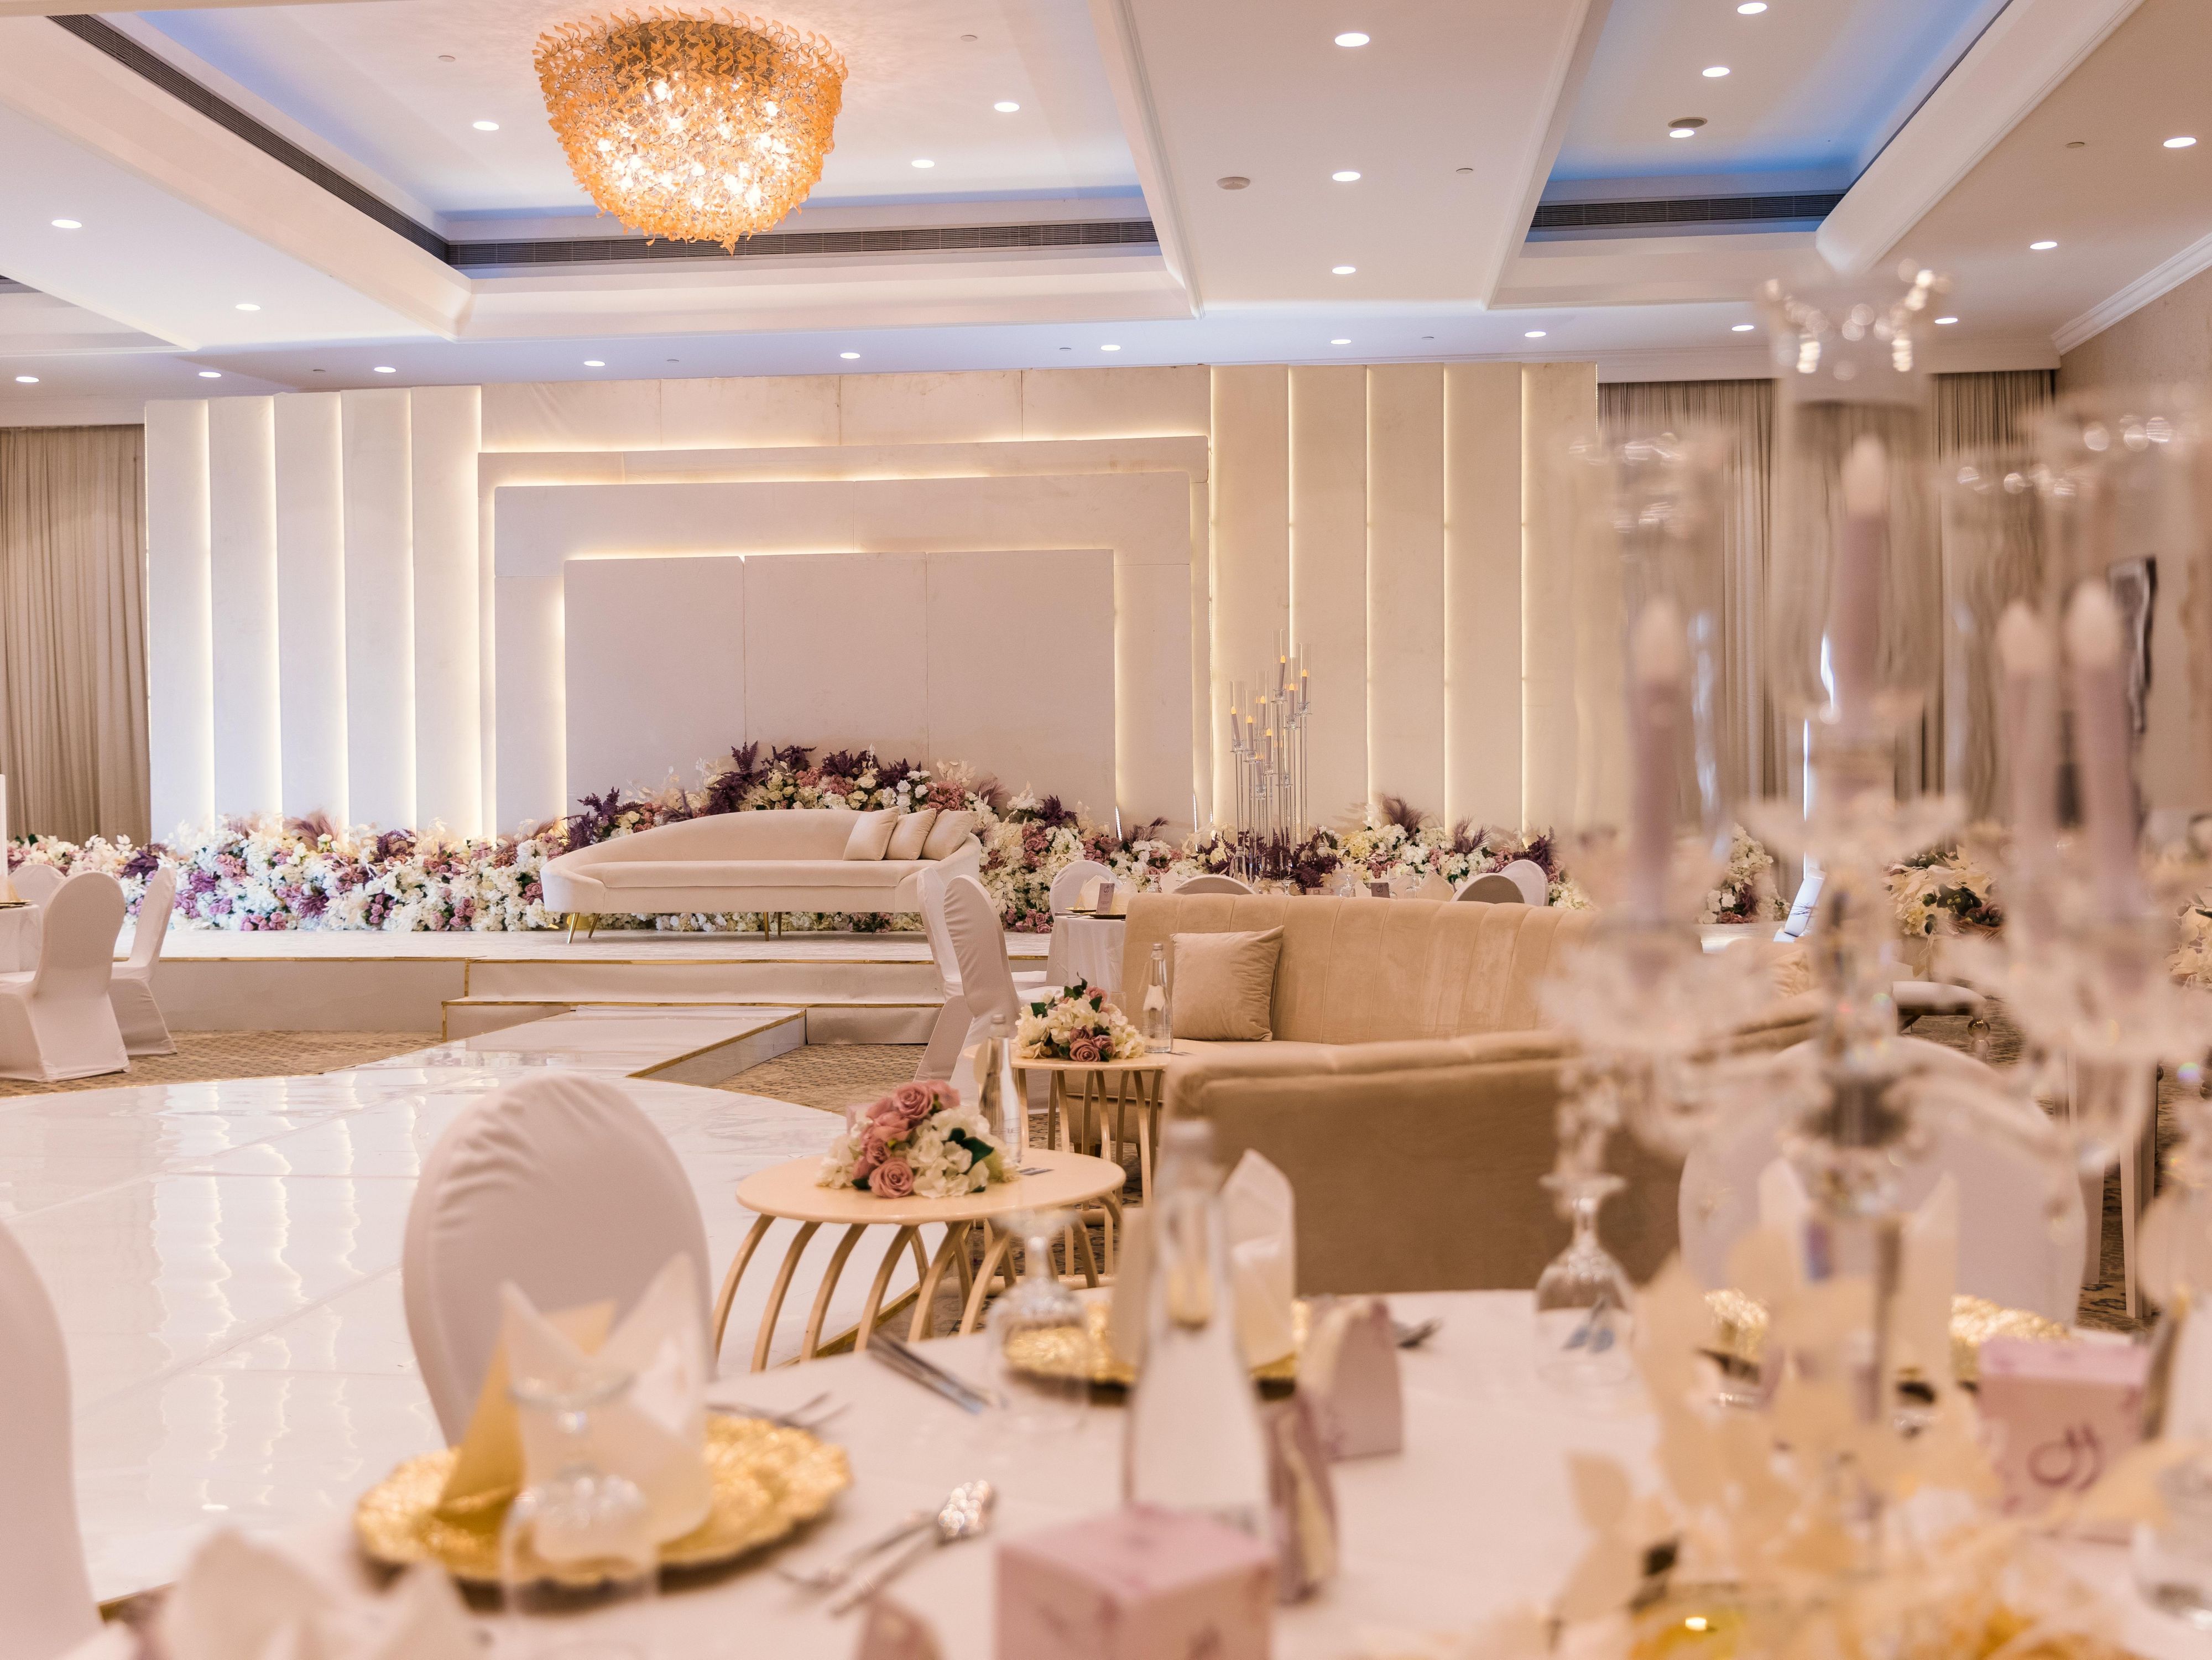 Crowne Plaza Muscat has great experience in hosting beautiful weddings with its first-class facilities. From special engagements to seamless ceremonies, we will make your special day an unforgettable experience.